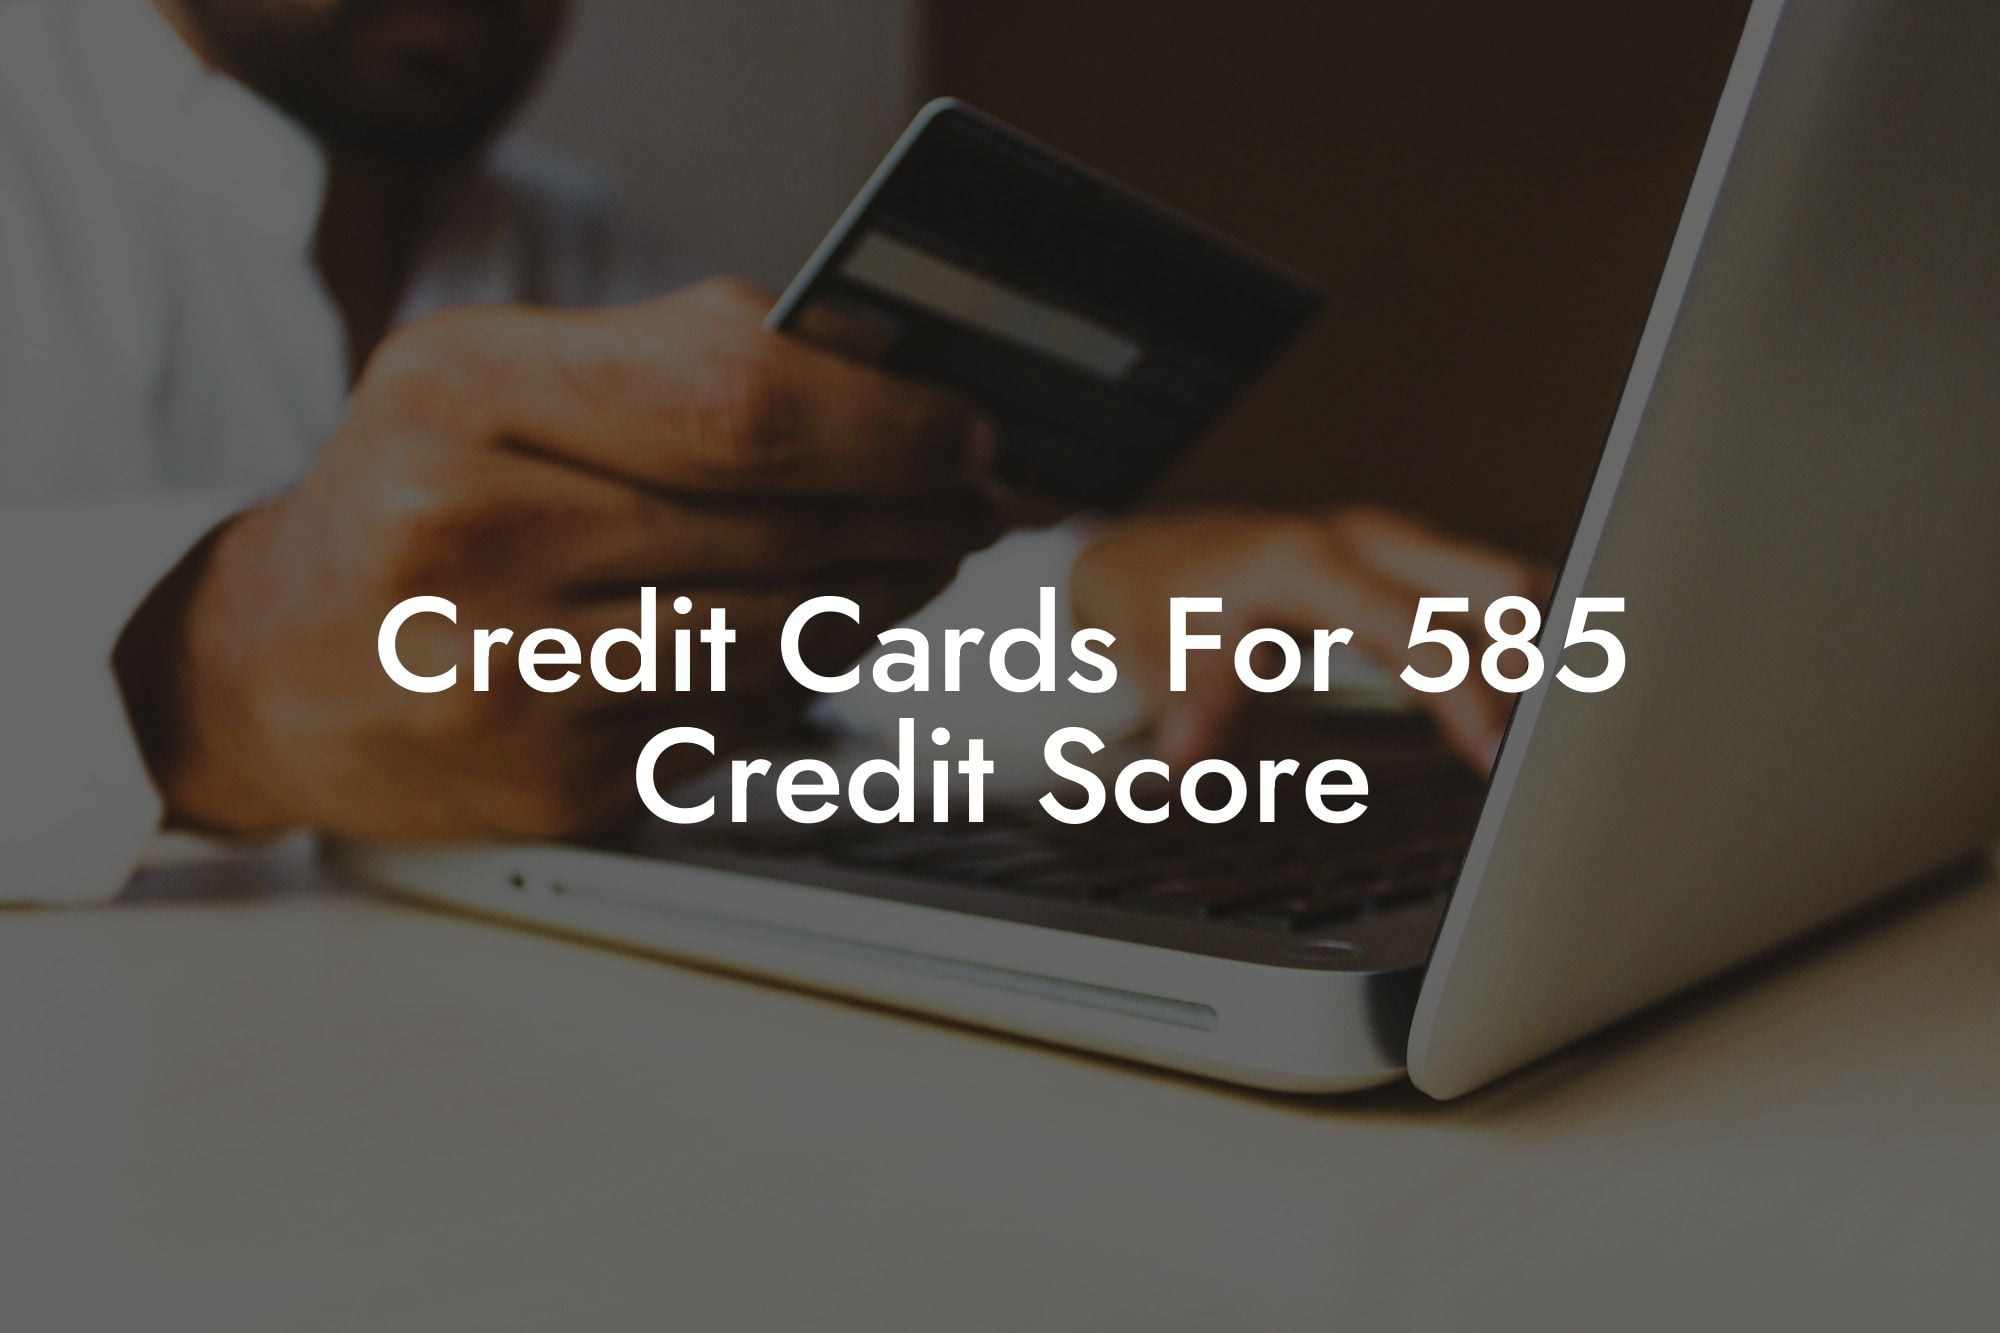 Credit Cards For 585 Credit Score